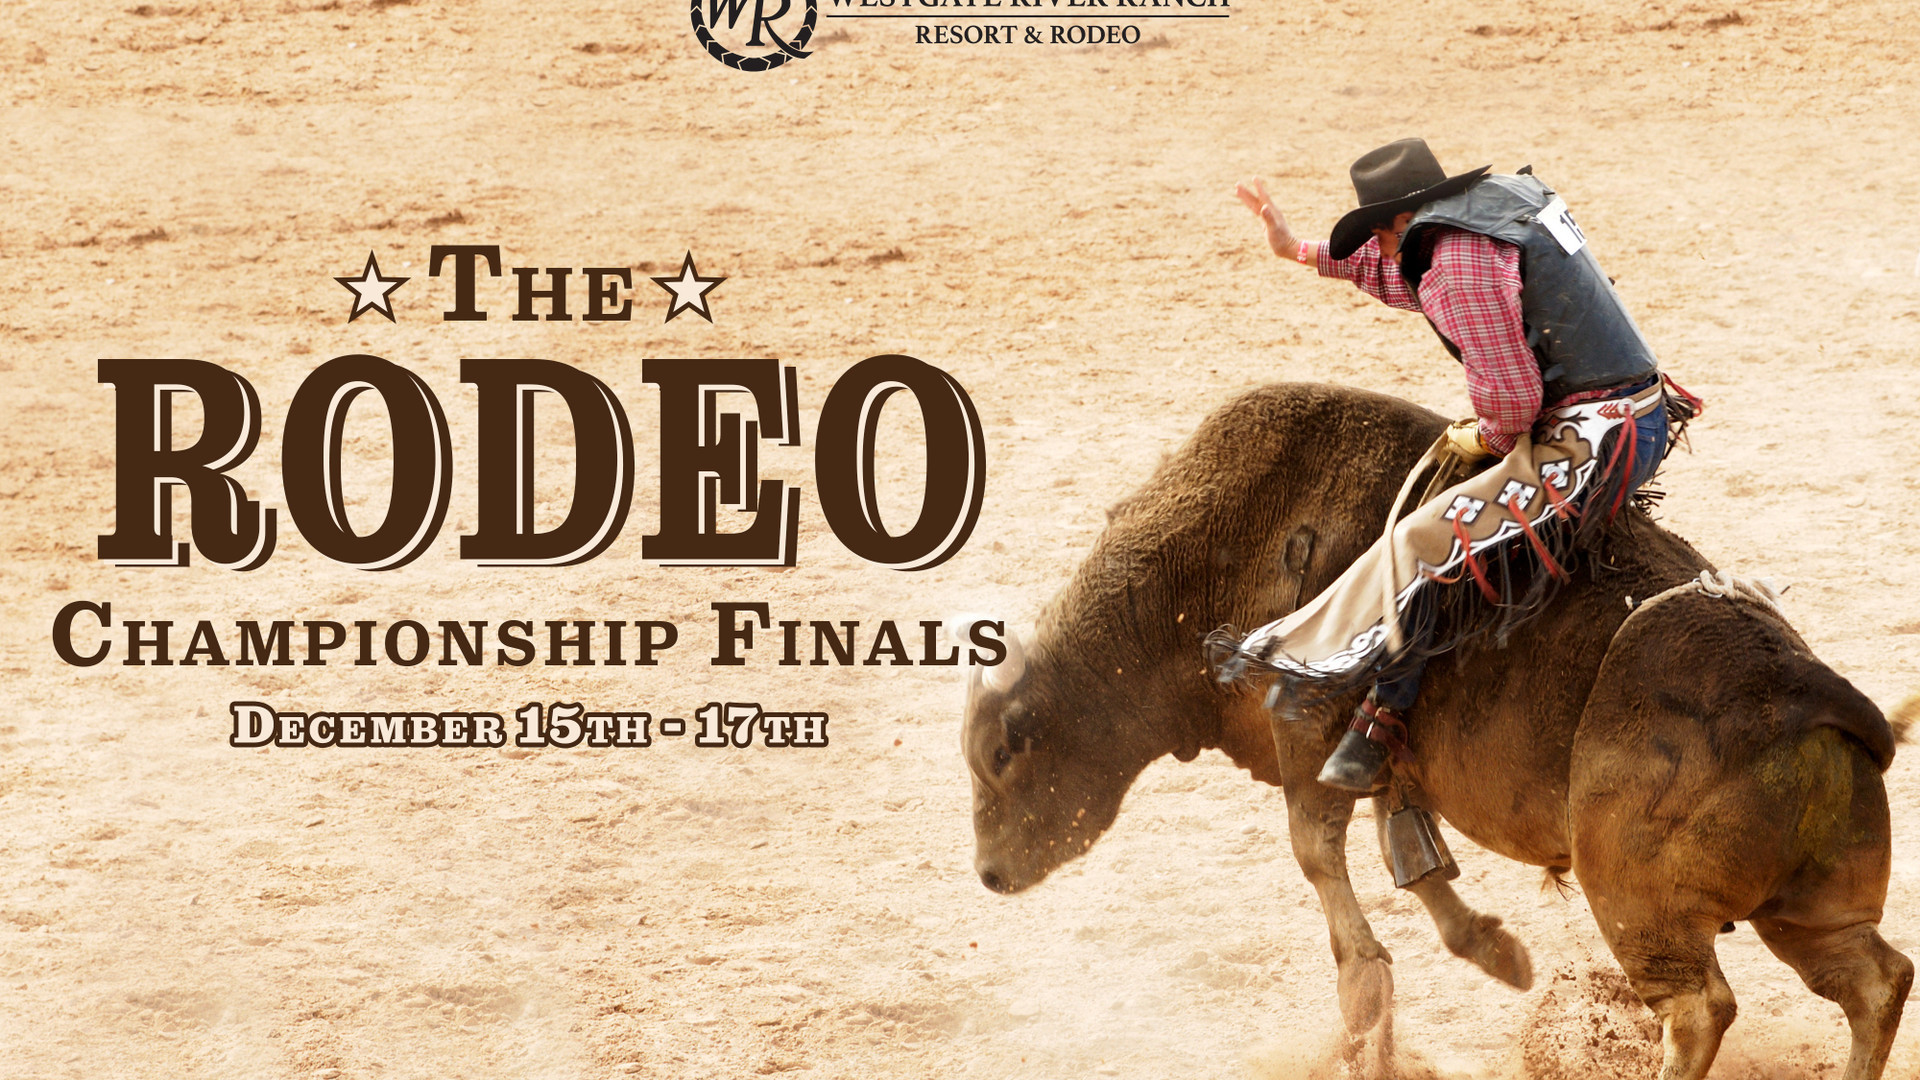 Westgate River Ranch Resort & Rodeo Announces 2nd Annual World of Westgate Pro Rodeo Championship Finals